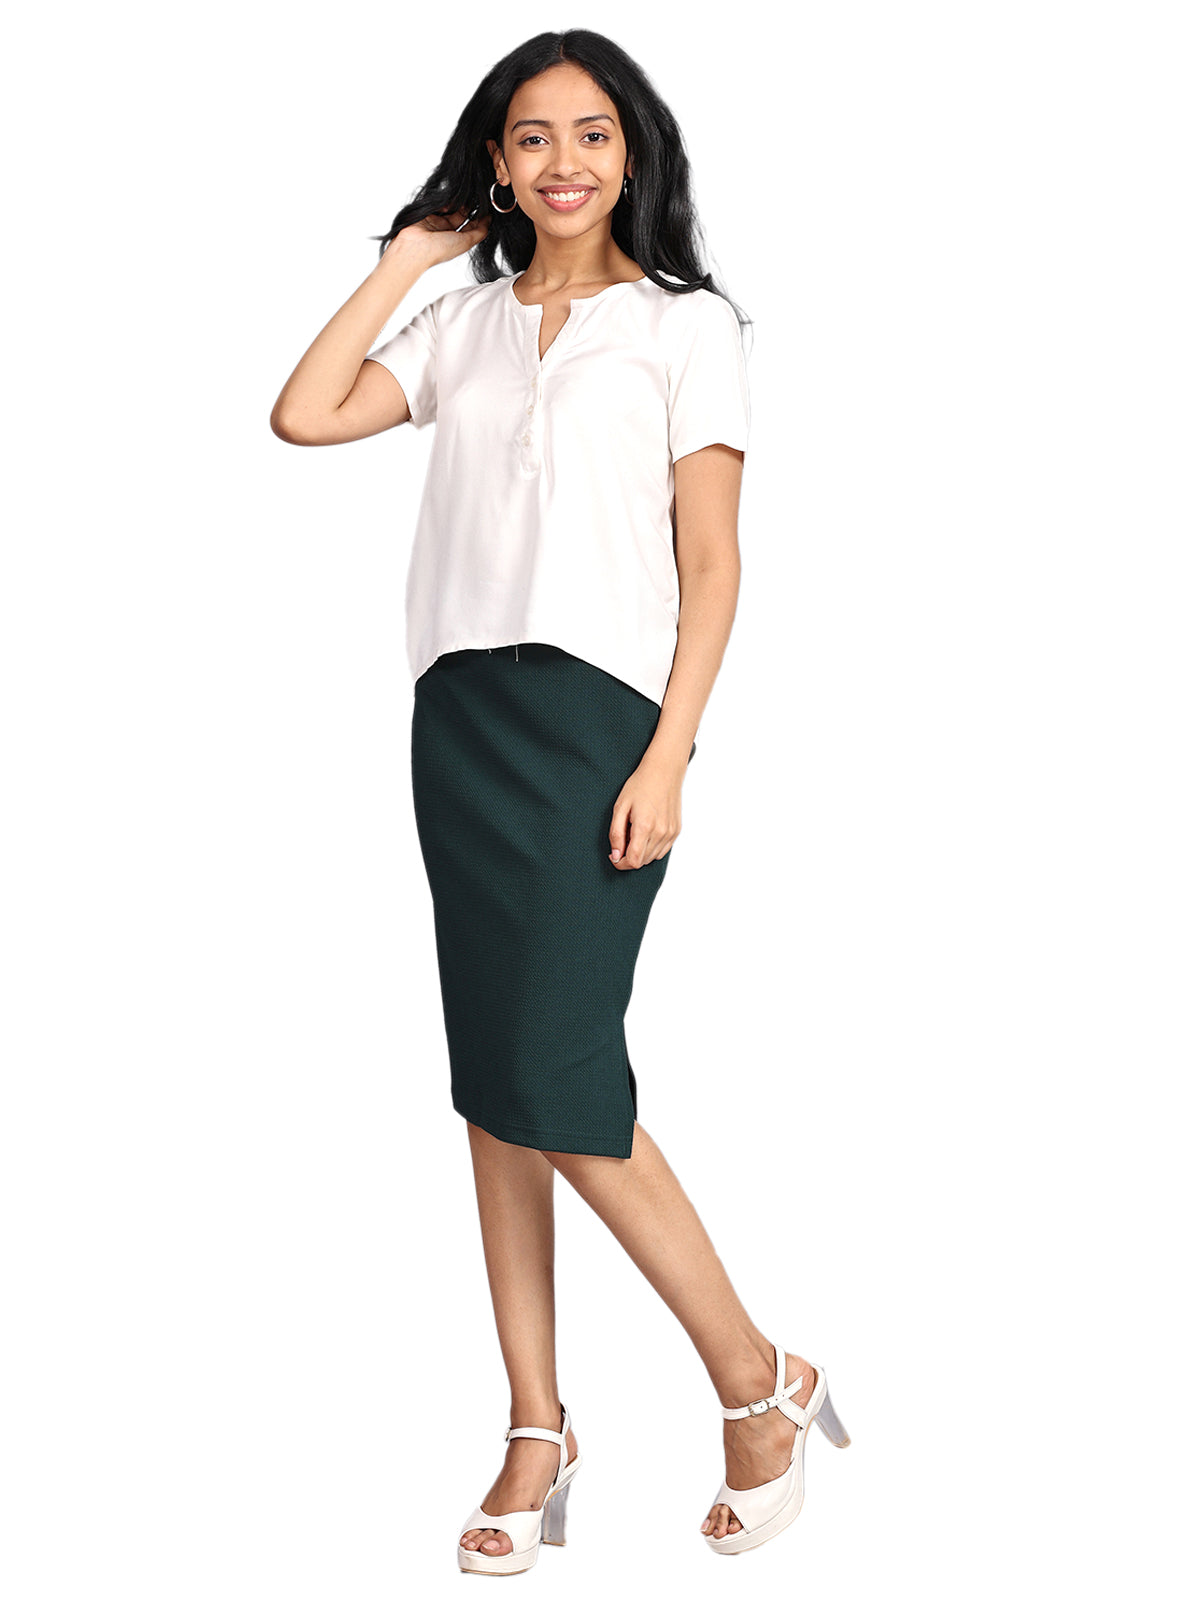 Green Skirt With Side Slit